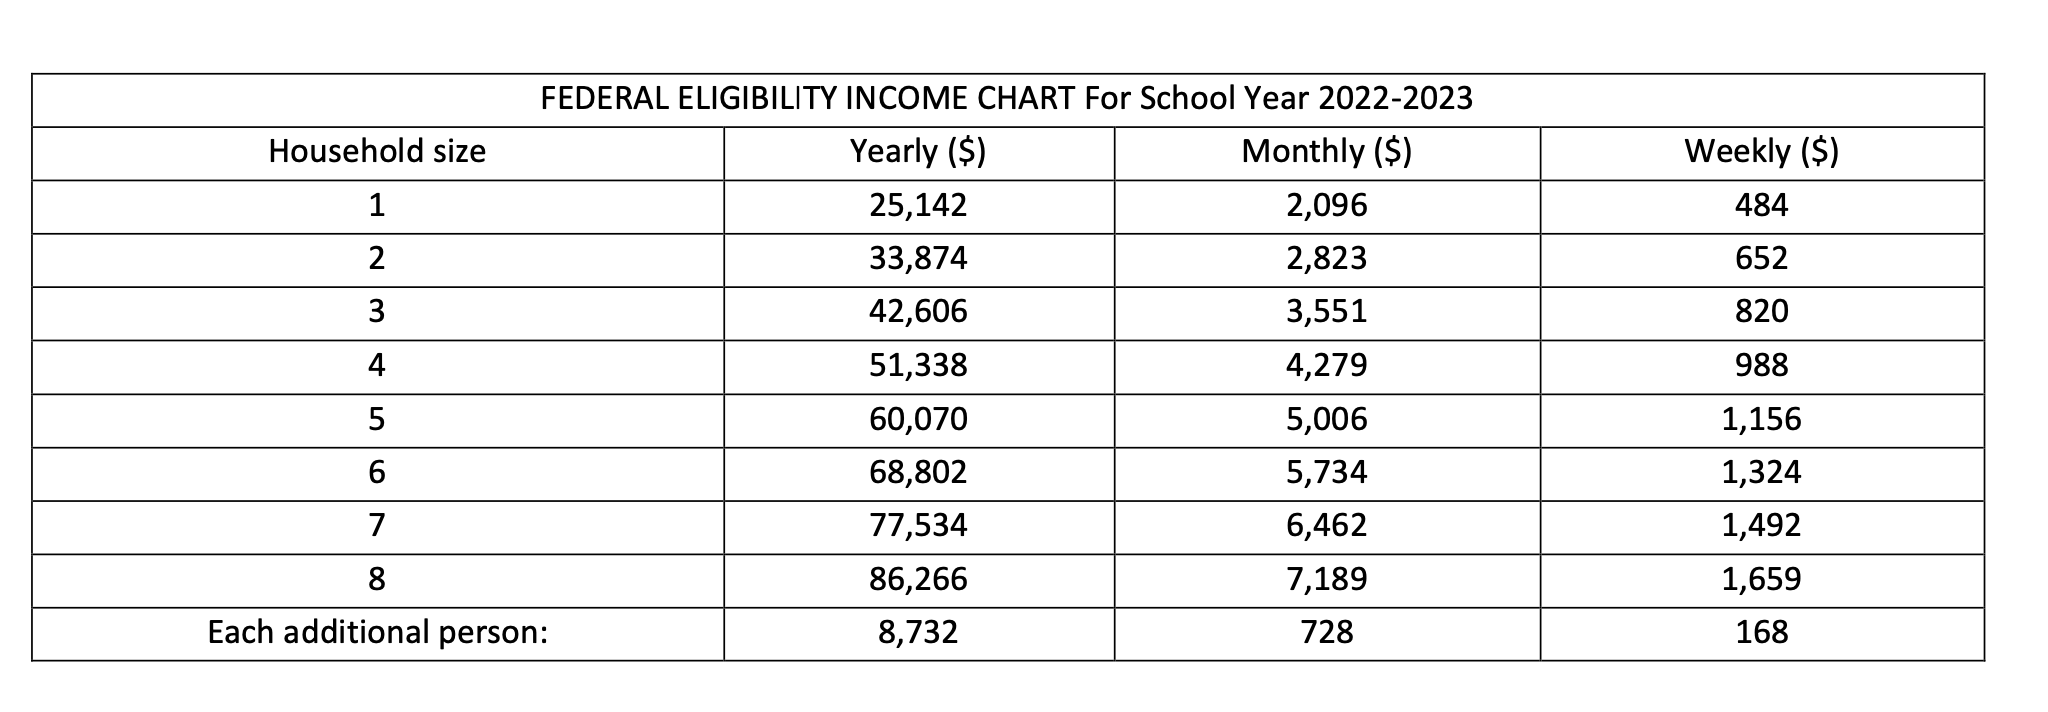 School Meals FEDERAL ELIGIBILITY INCOME CHART For School Year 2022-2023